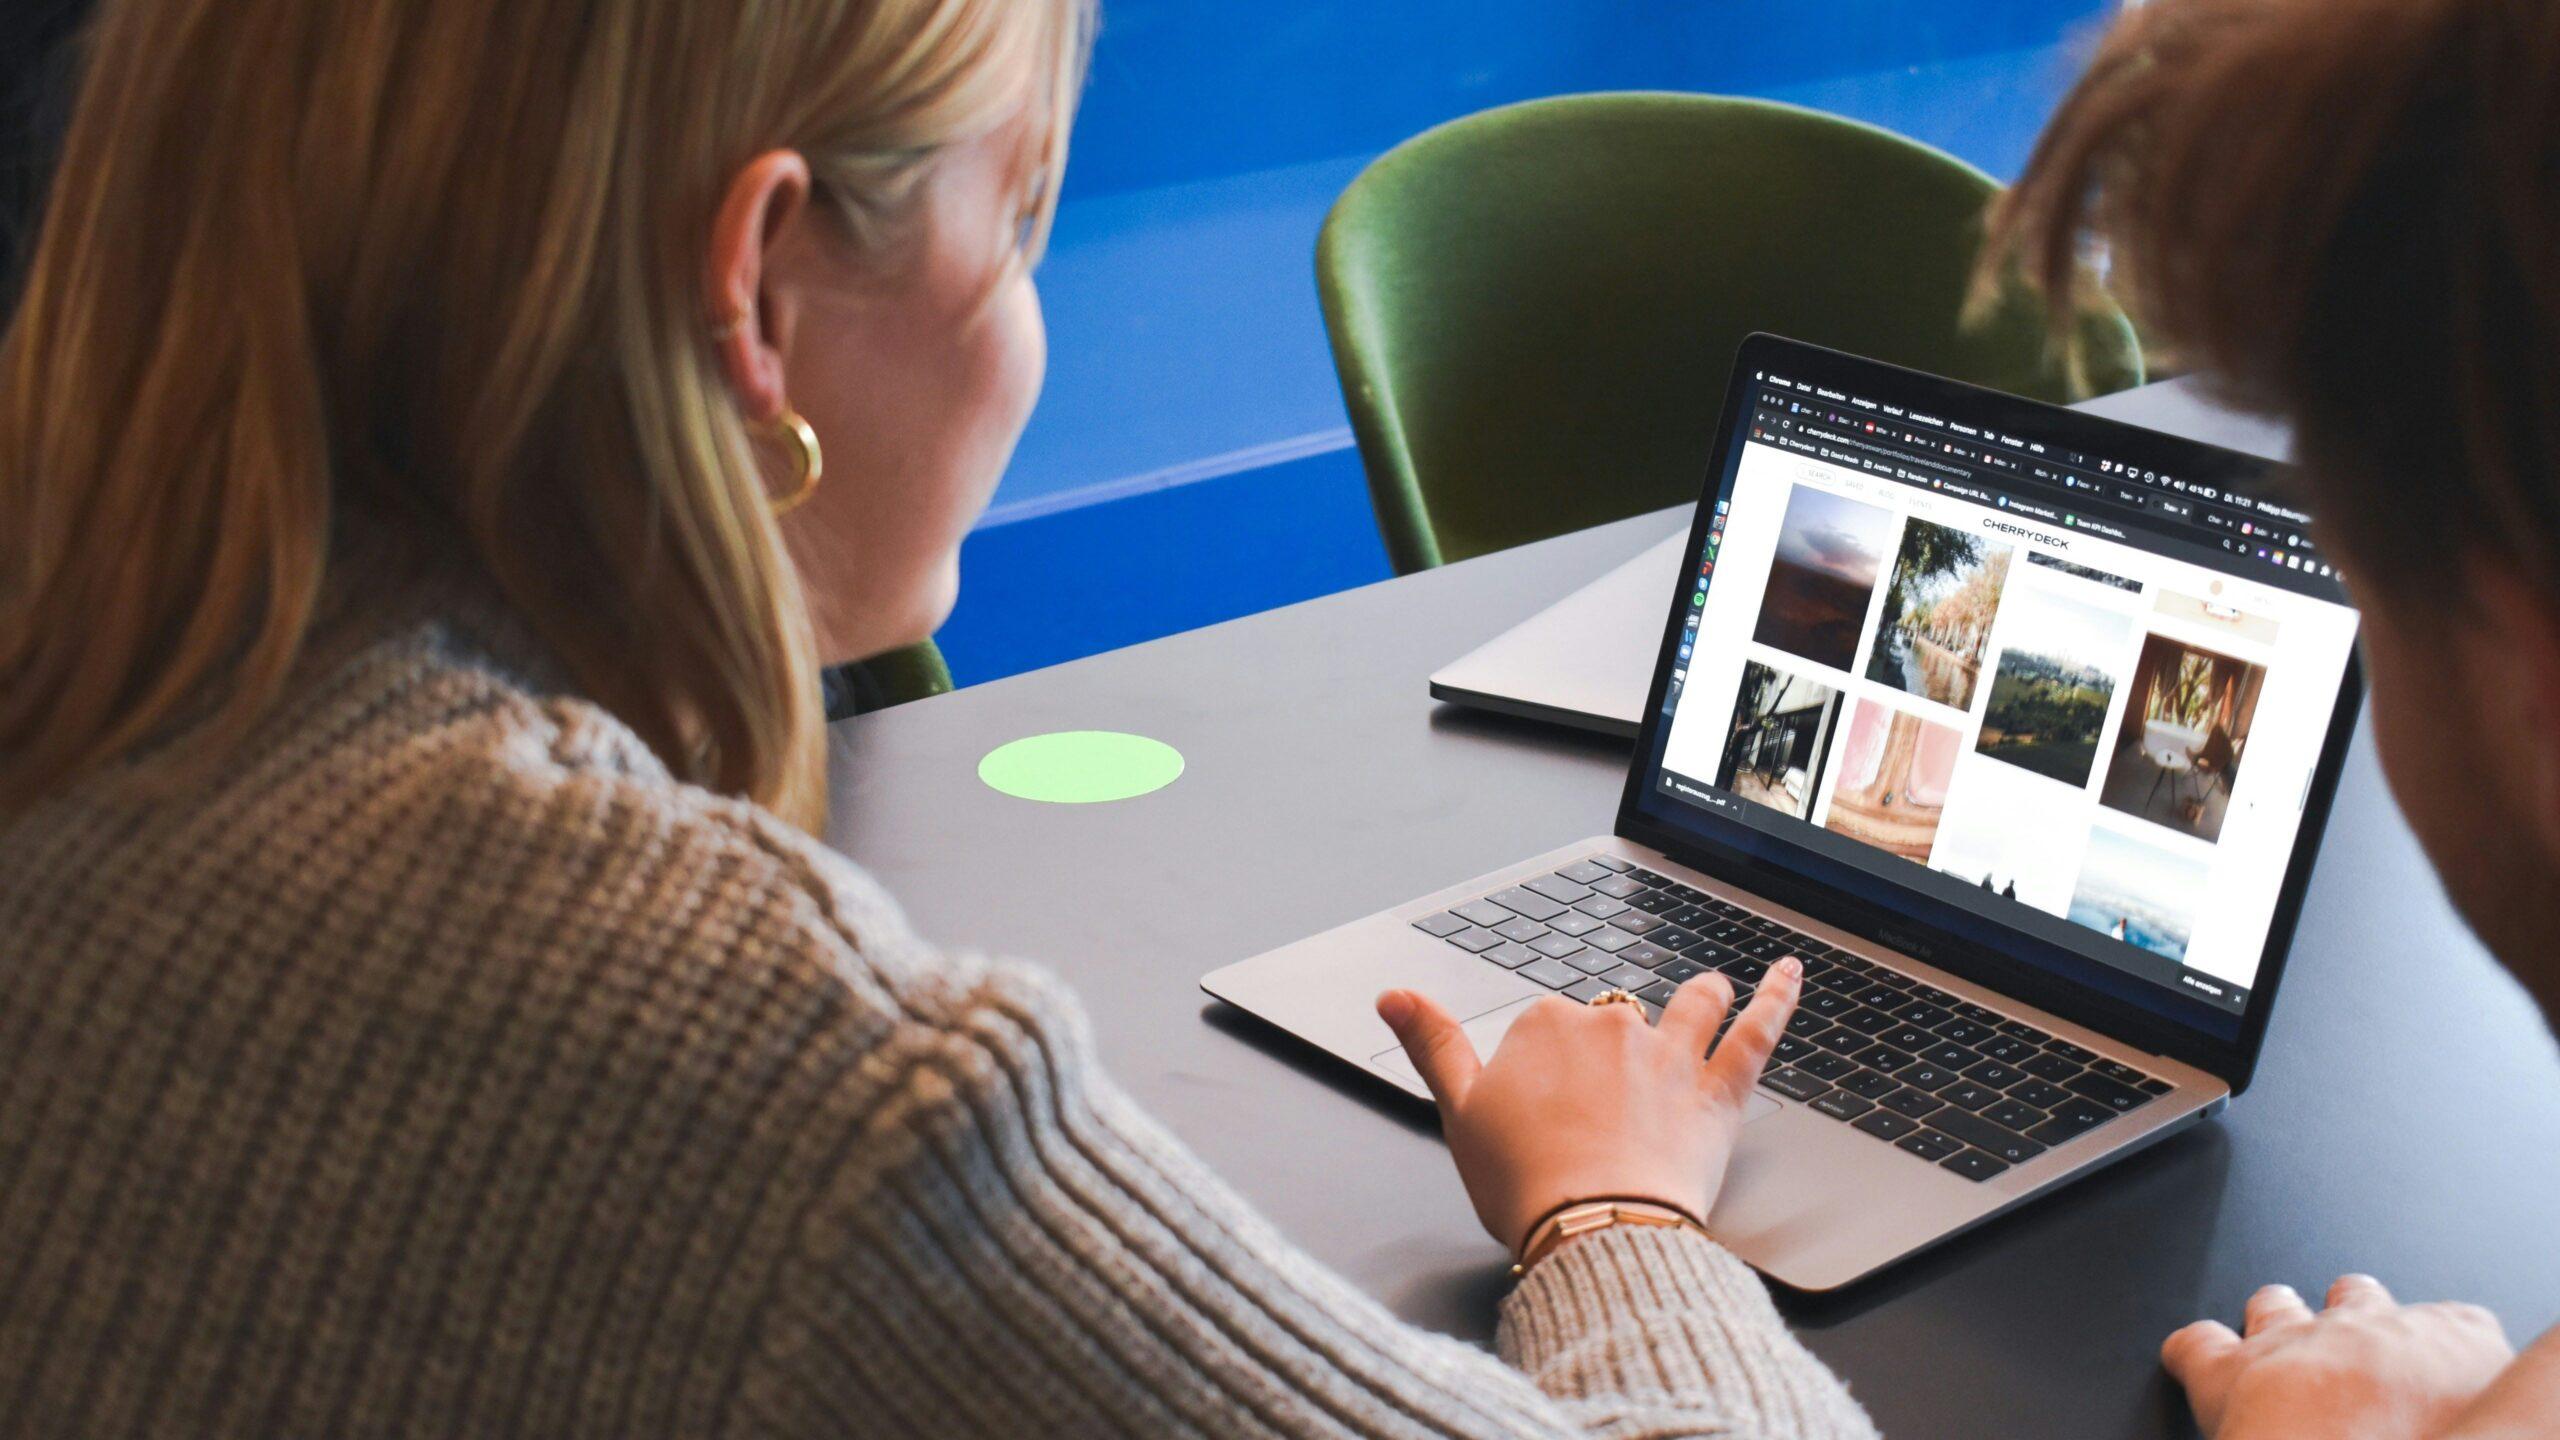 Woman interacting with a laptop displaying various images.